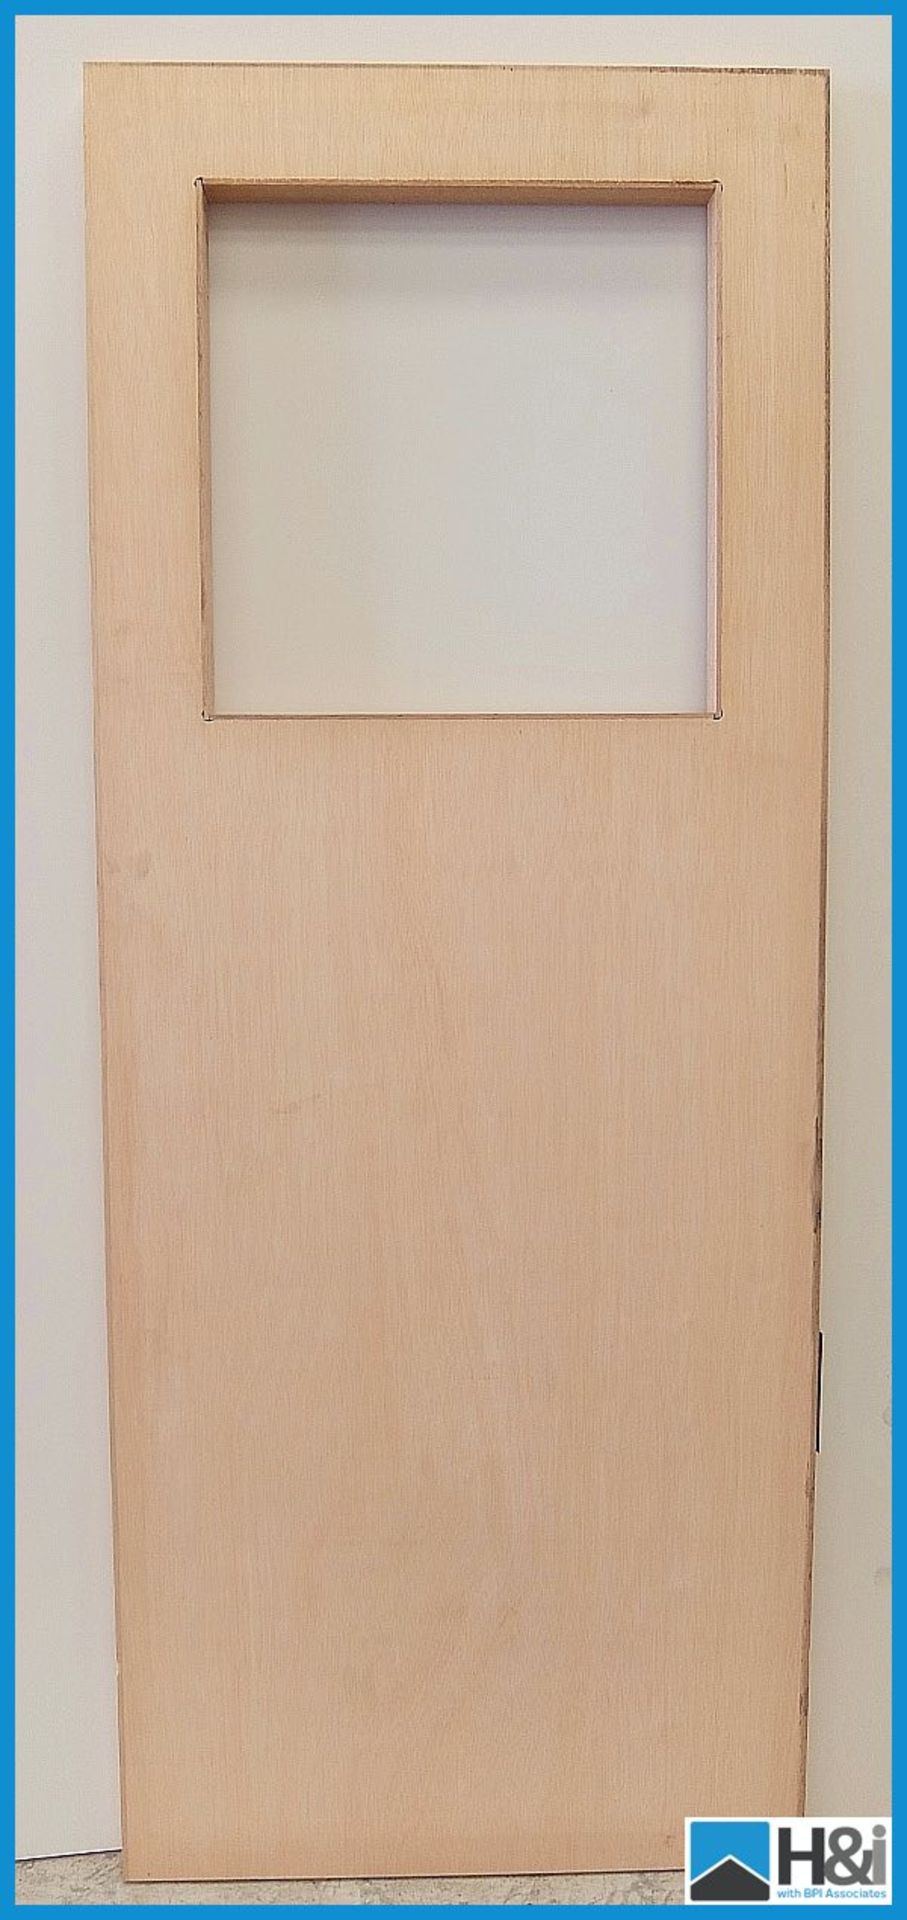 2ft 8in 44mm thick 30 minute fire door. Apertured for glazing. Beading supplied. 80in x 32in,